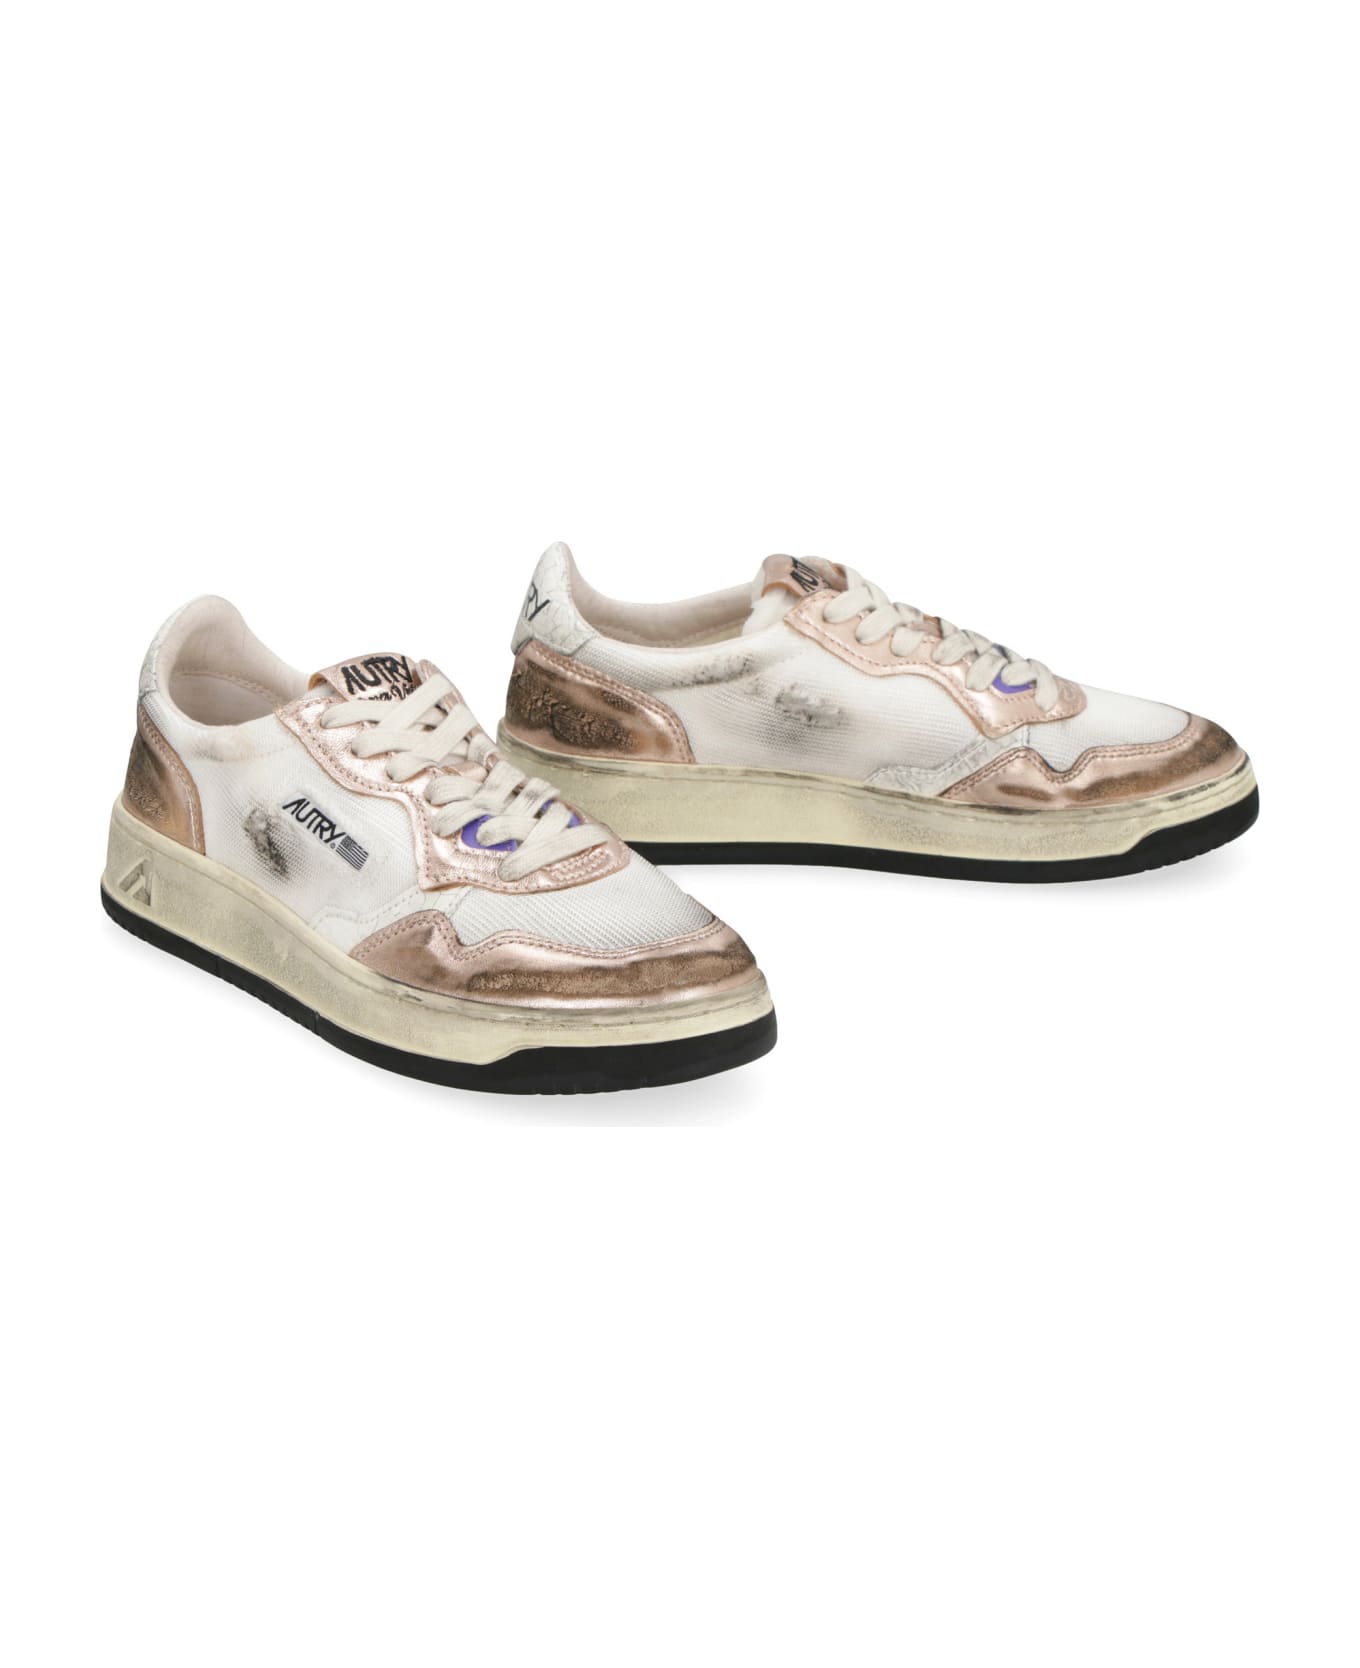 Autry Super Vintage Medalist Low Sneakers In White And Gold Leather - Bronze スニーカー